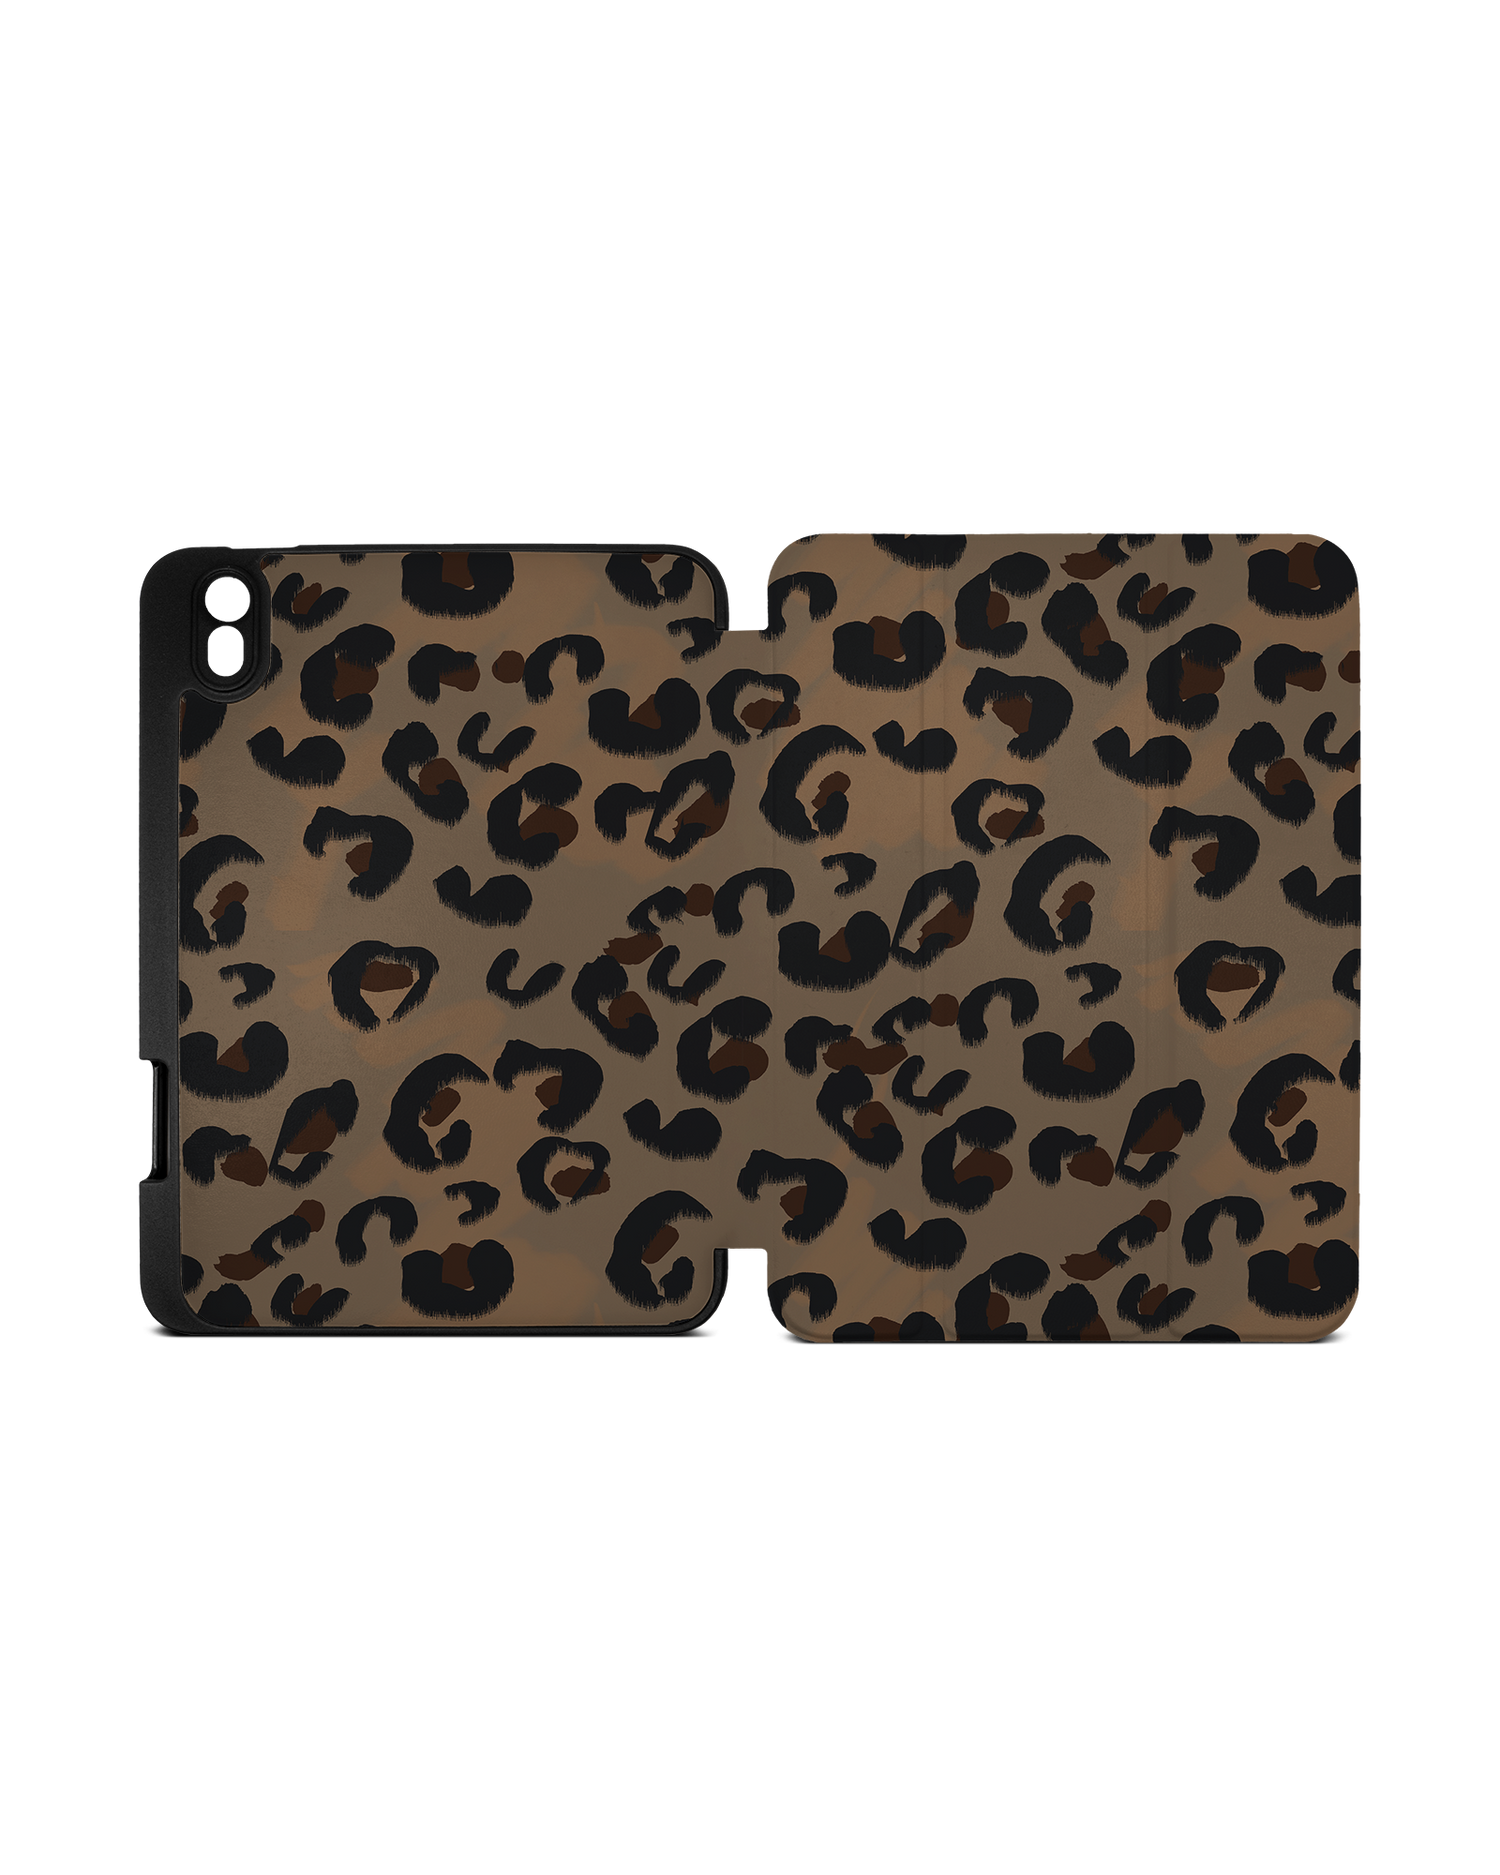 Leopard Repeat iPad Case with Pencil Holder Apple iPad mini 6 (2021): Opened exterior view